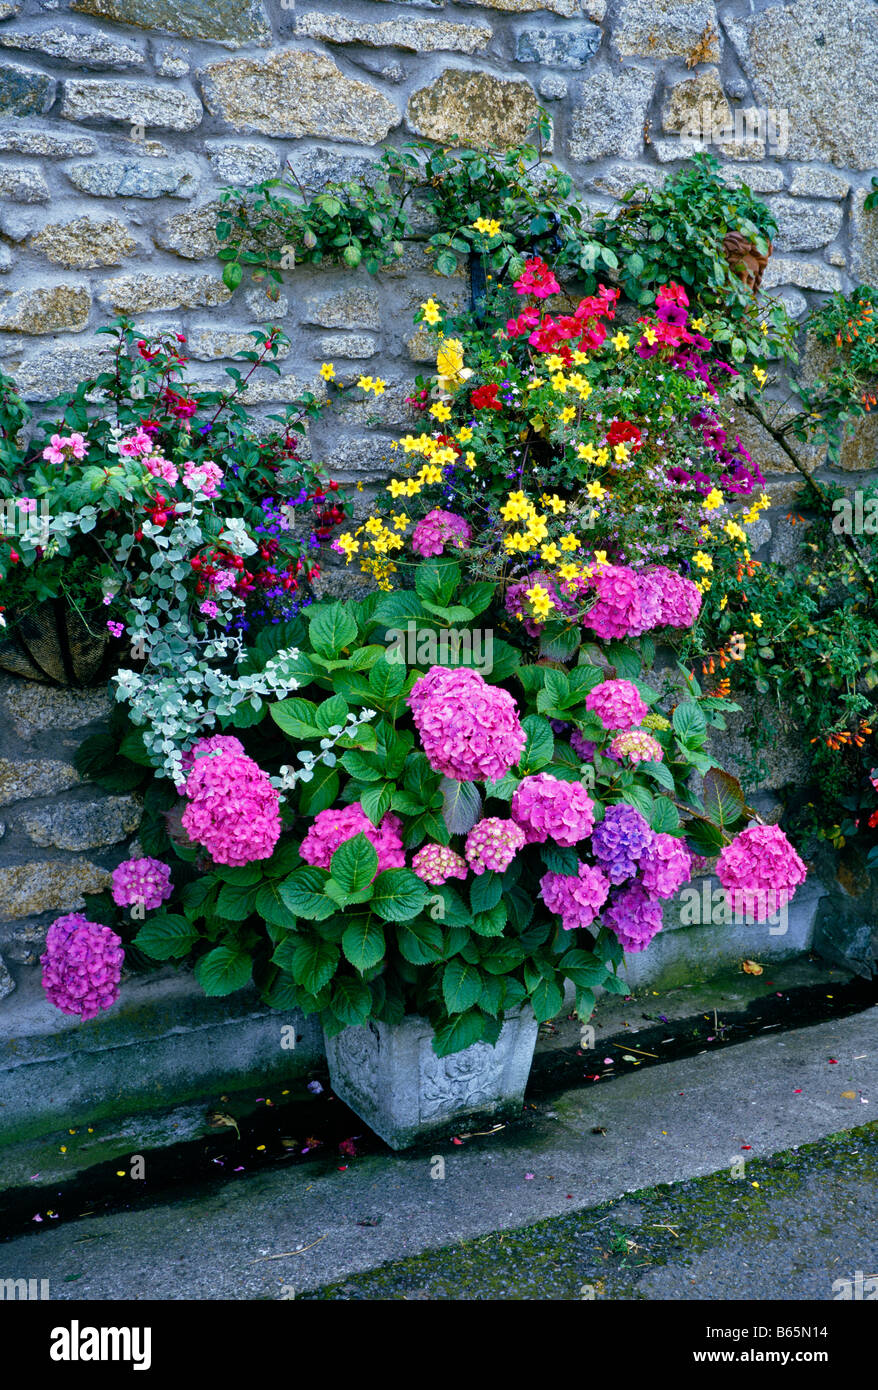 Colourful display of containers and wall baskets Stock Photo